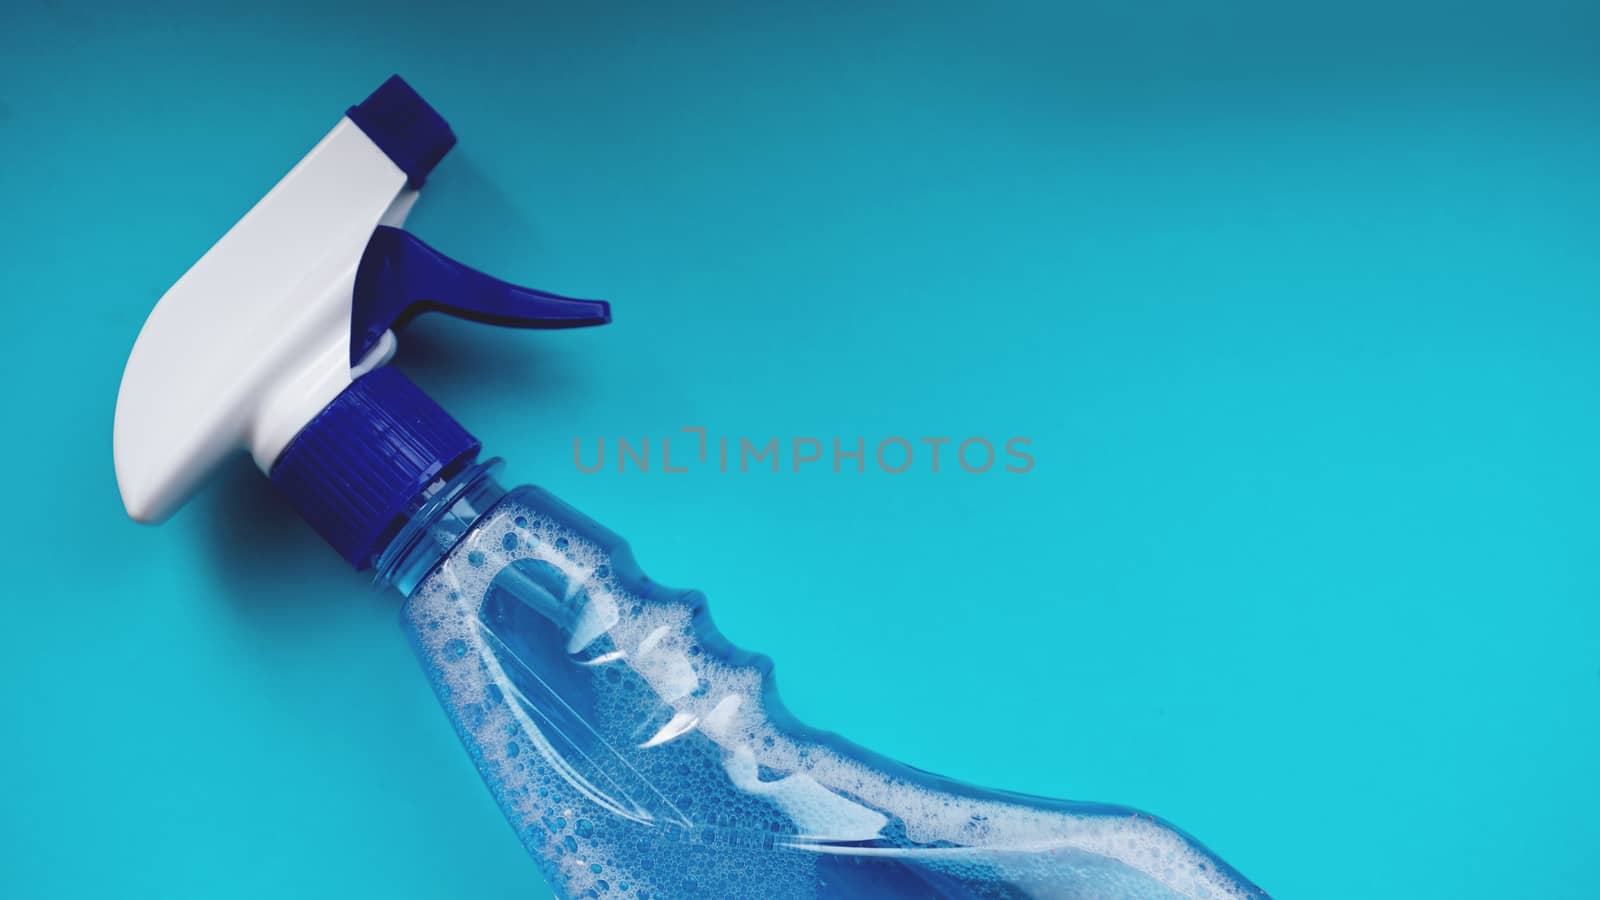 Spray with detergent on blue background by natali_brill